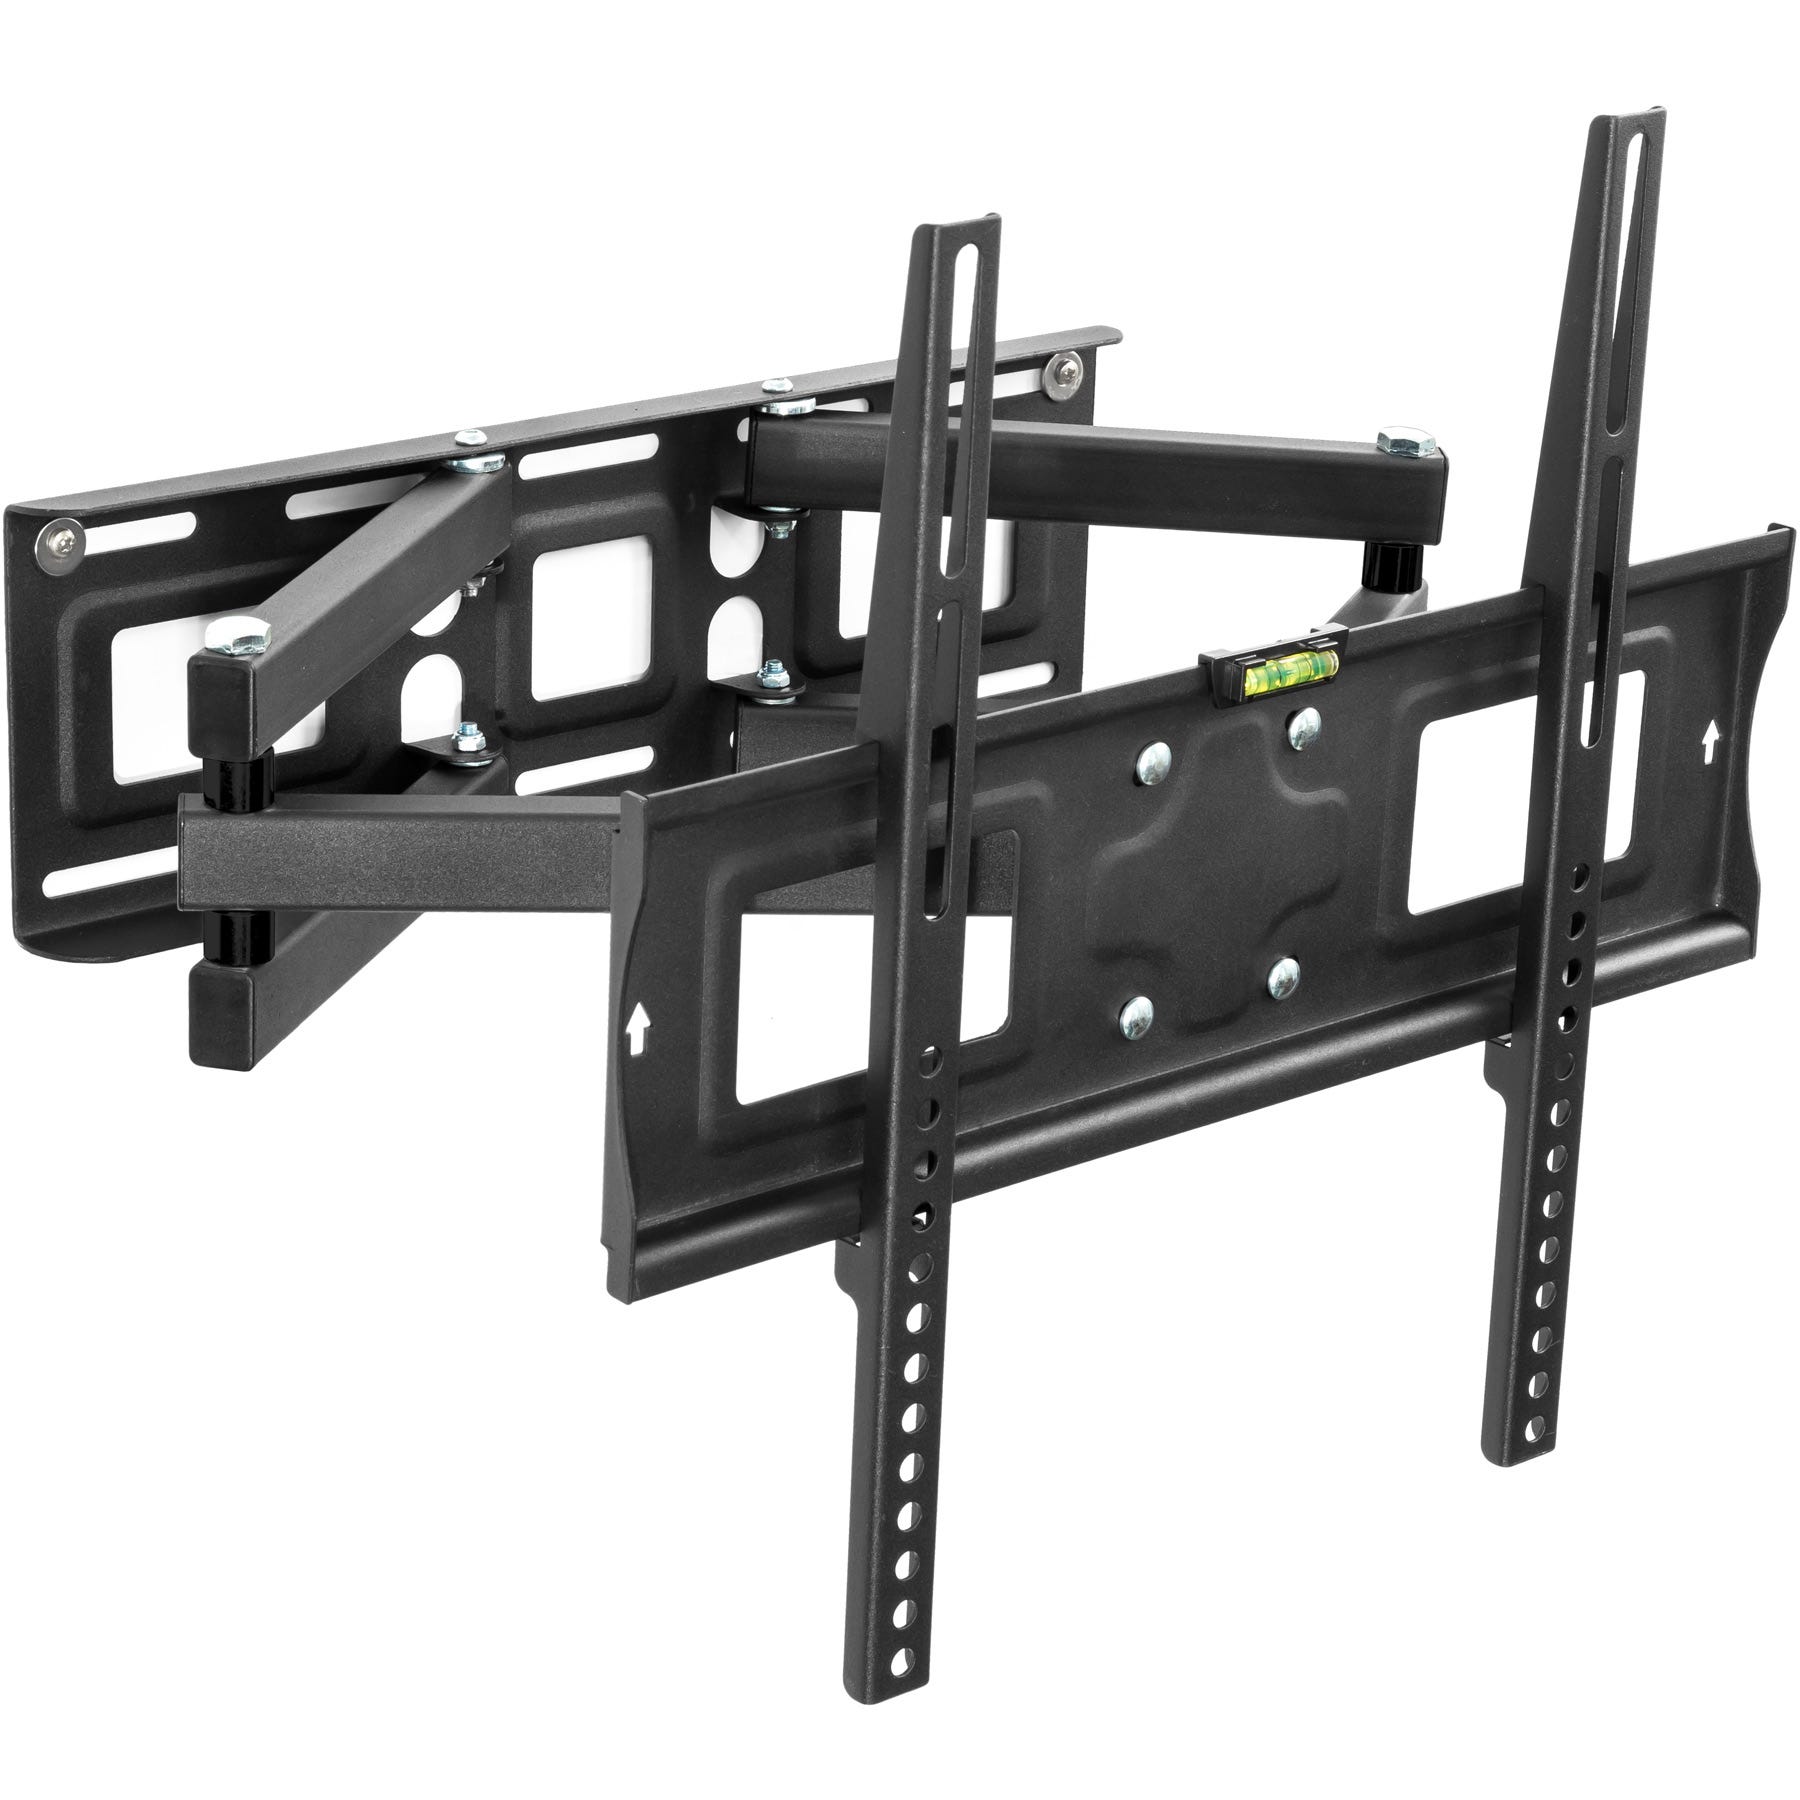 Tectake Support mural TV 26- 55 orientable et inclinable, VESA